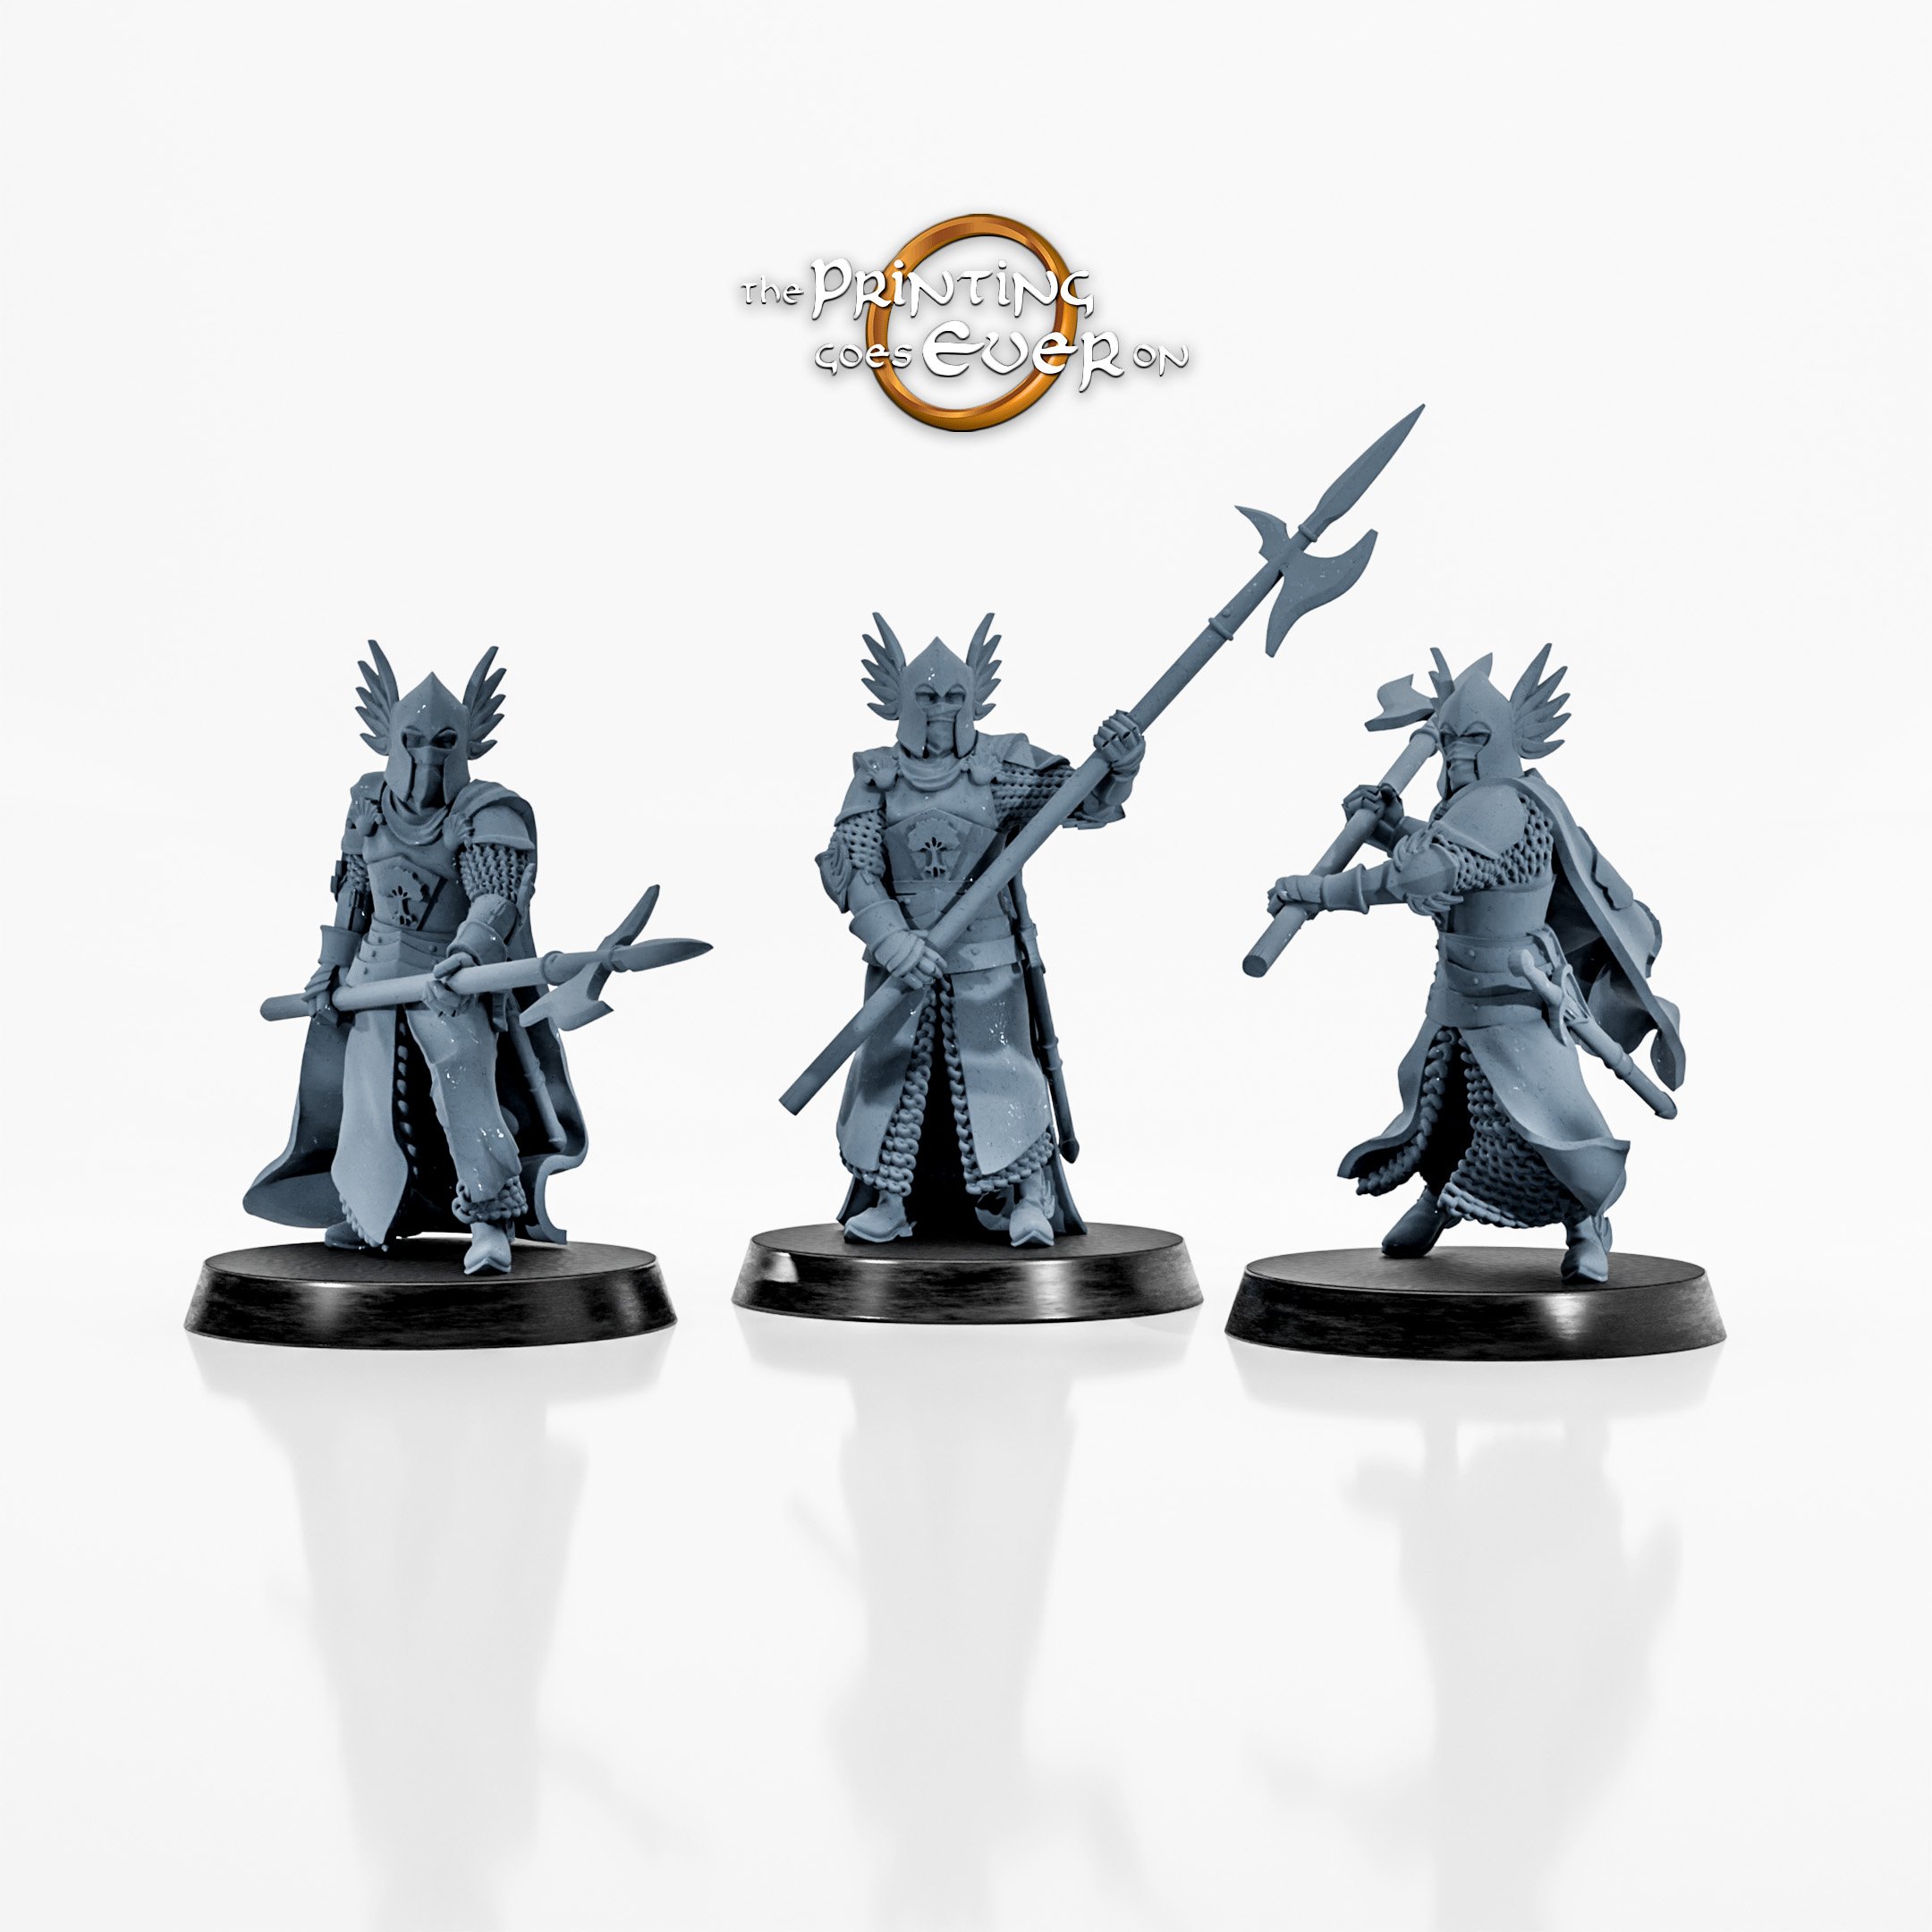 Gontham King's Guard wargaming miniatures for skirmish battles designed by The Printing Goes Ever On 3D printed by Forgemaster Miniatures